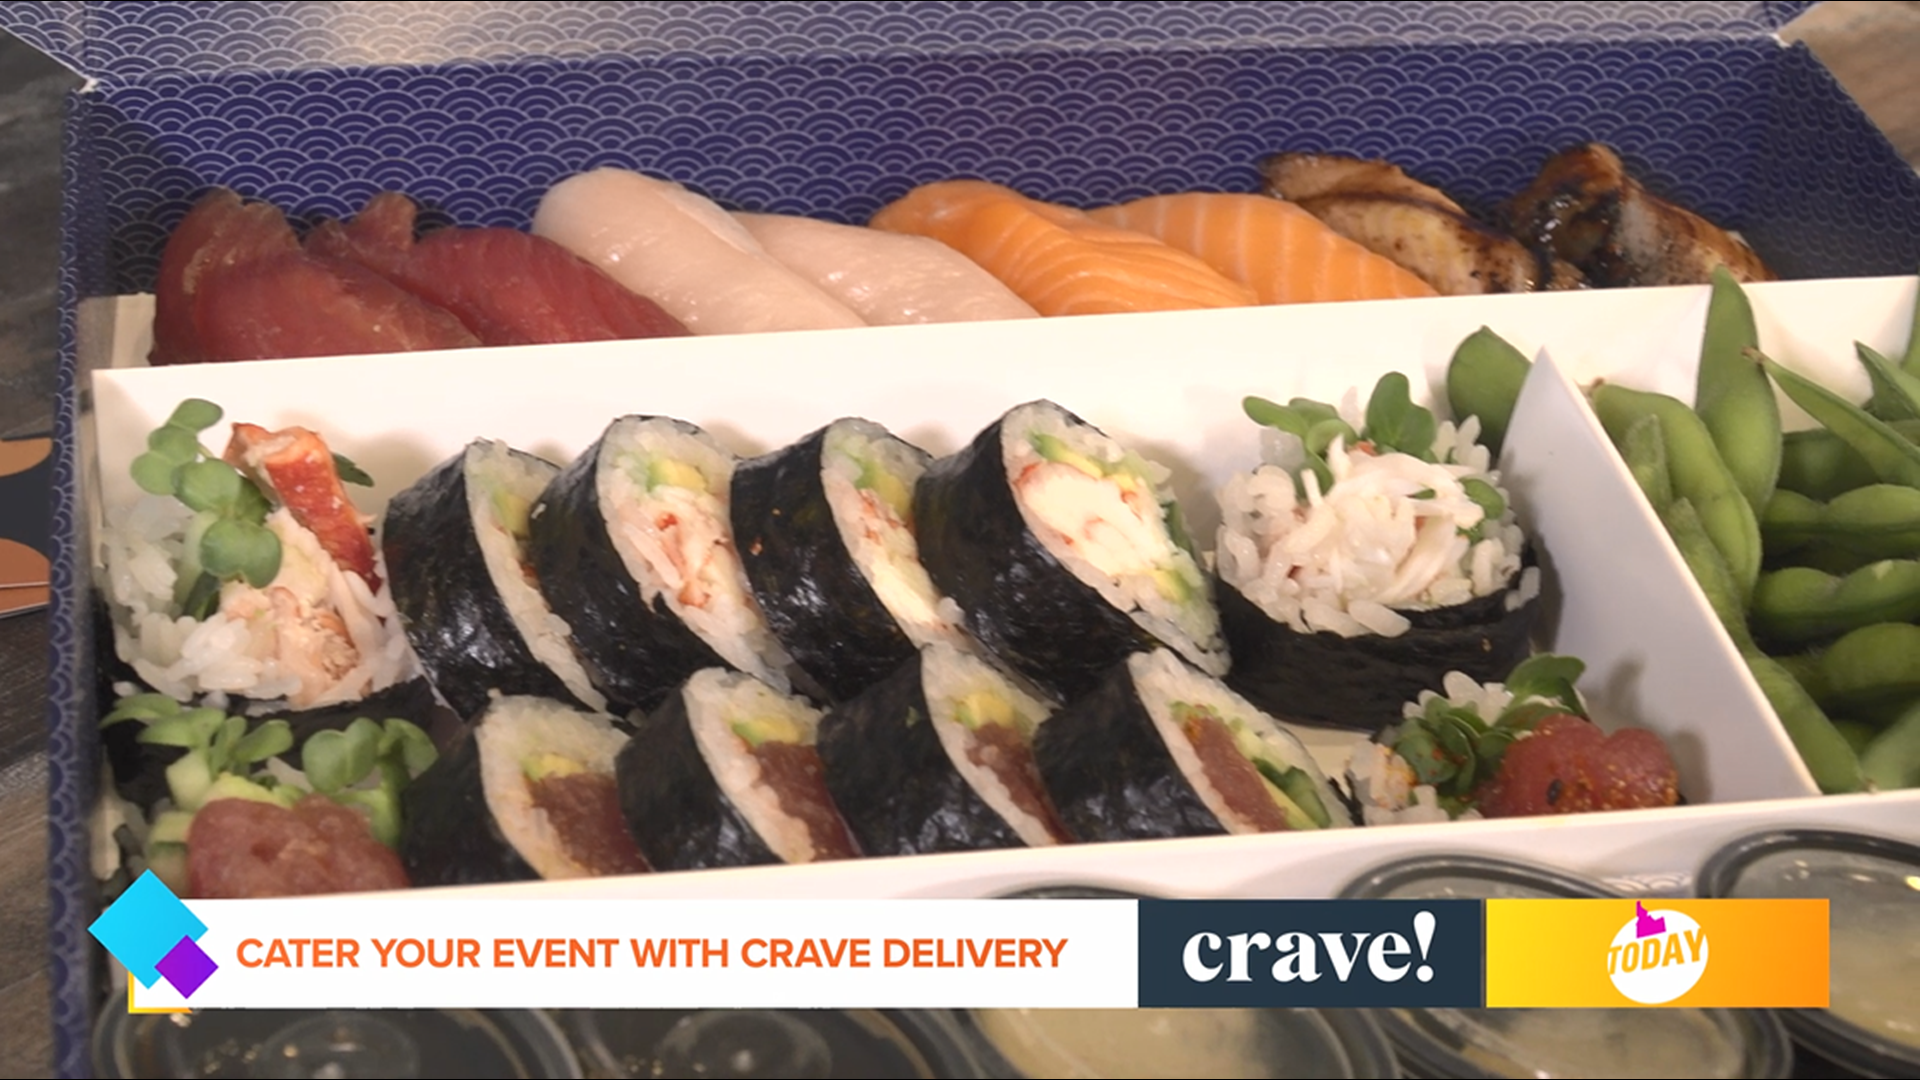 Crave Delivery does not only deliver gourmet meals to your doorstop but they also help business owners with catering: www.CraveDelivery.com/Catering